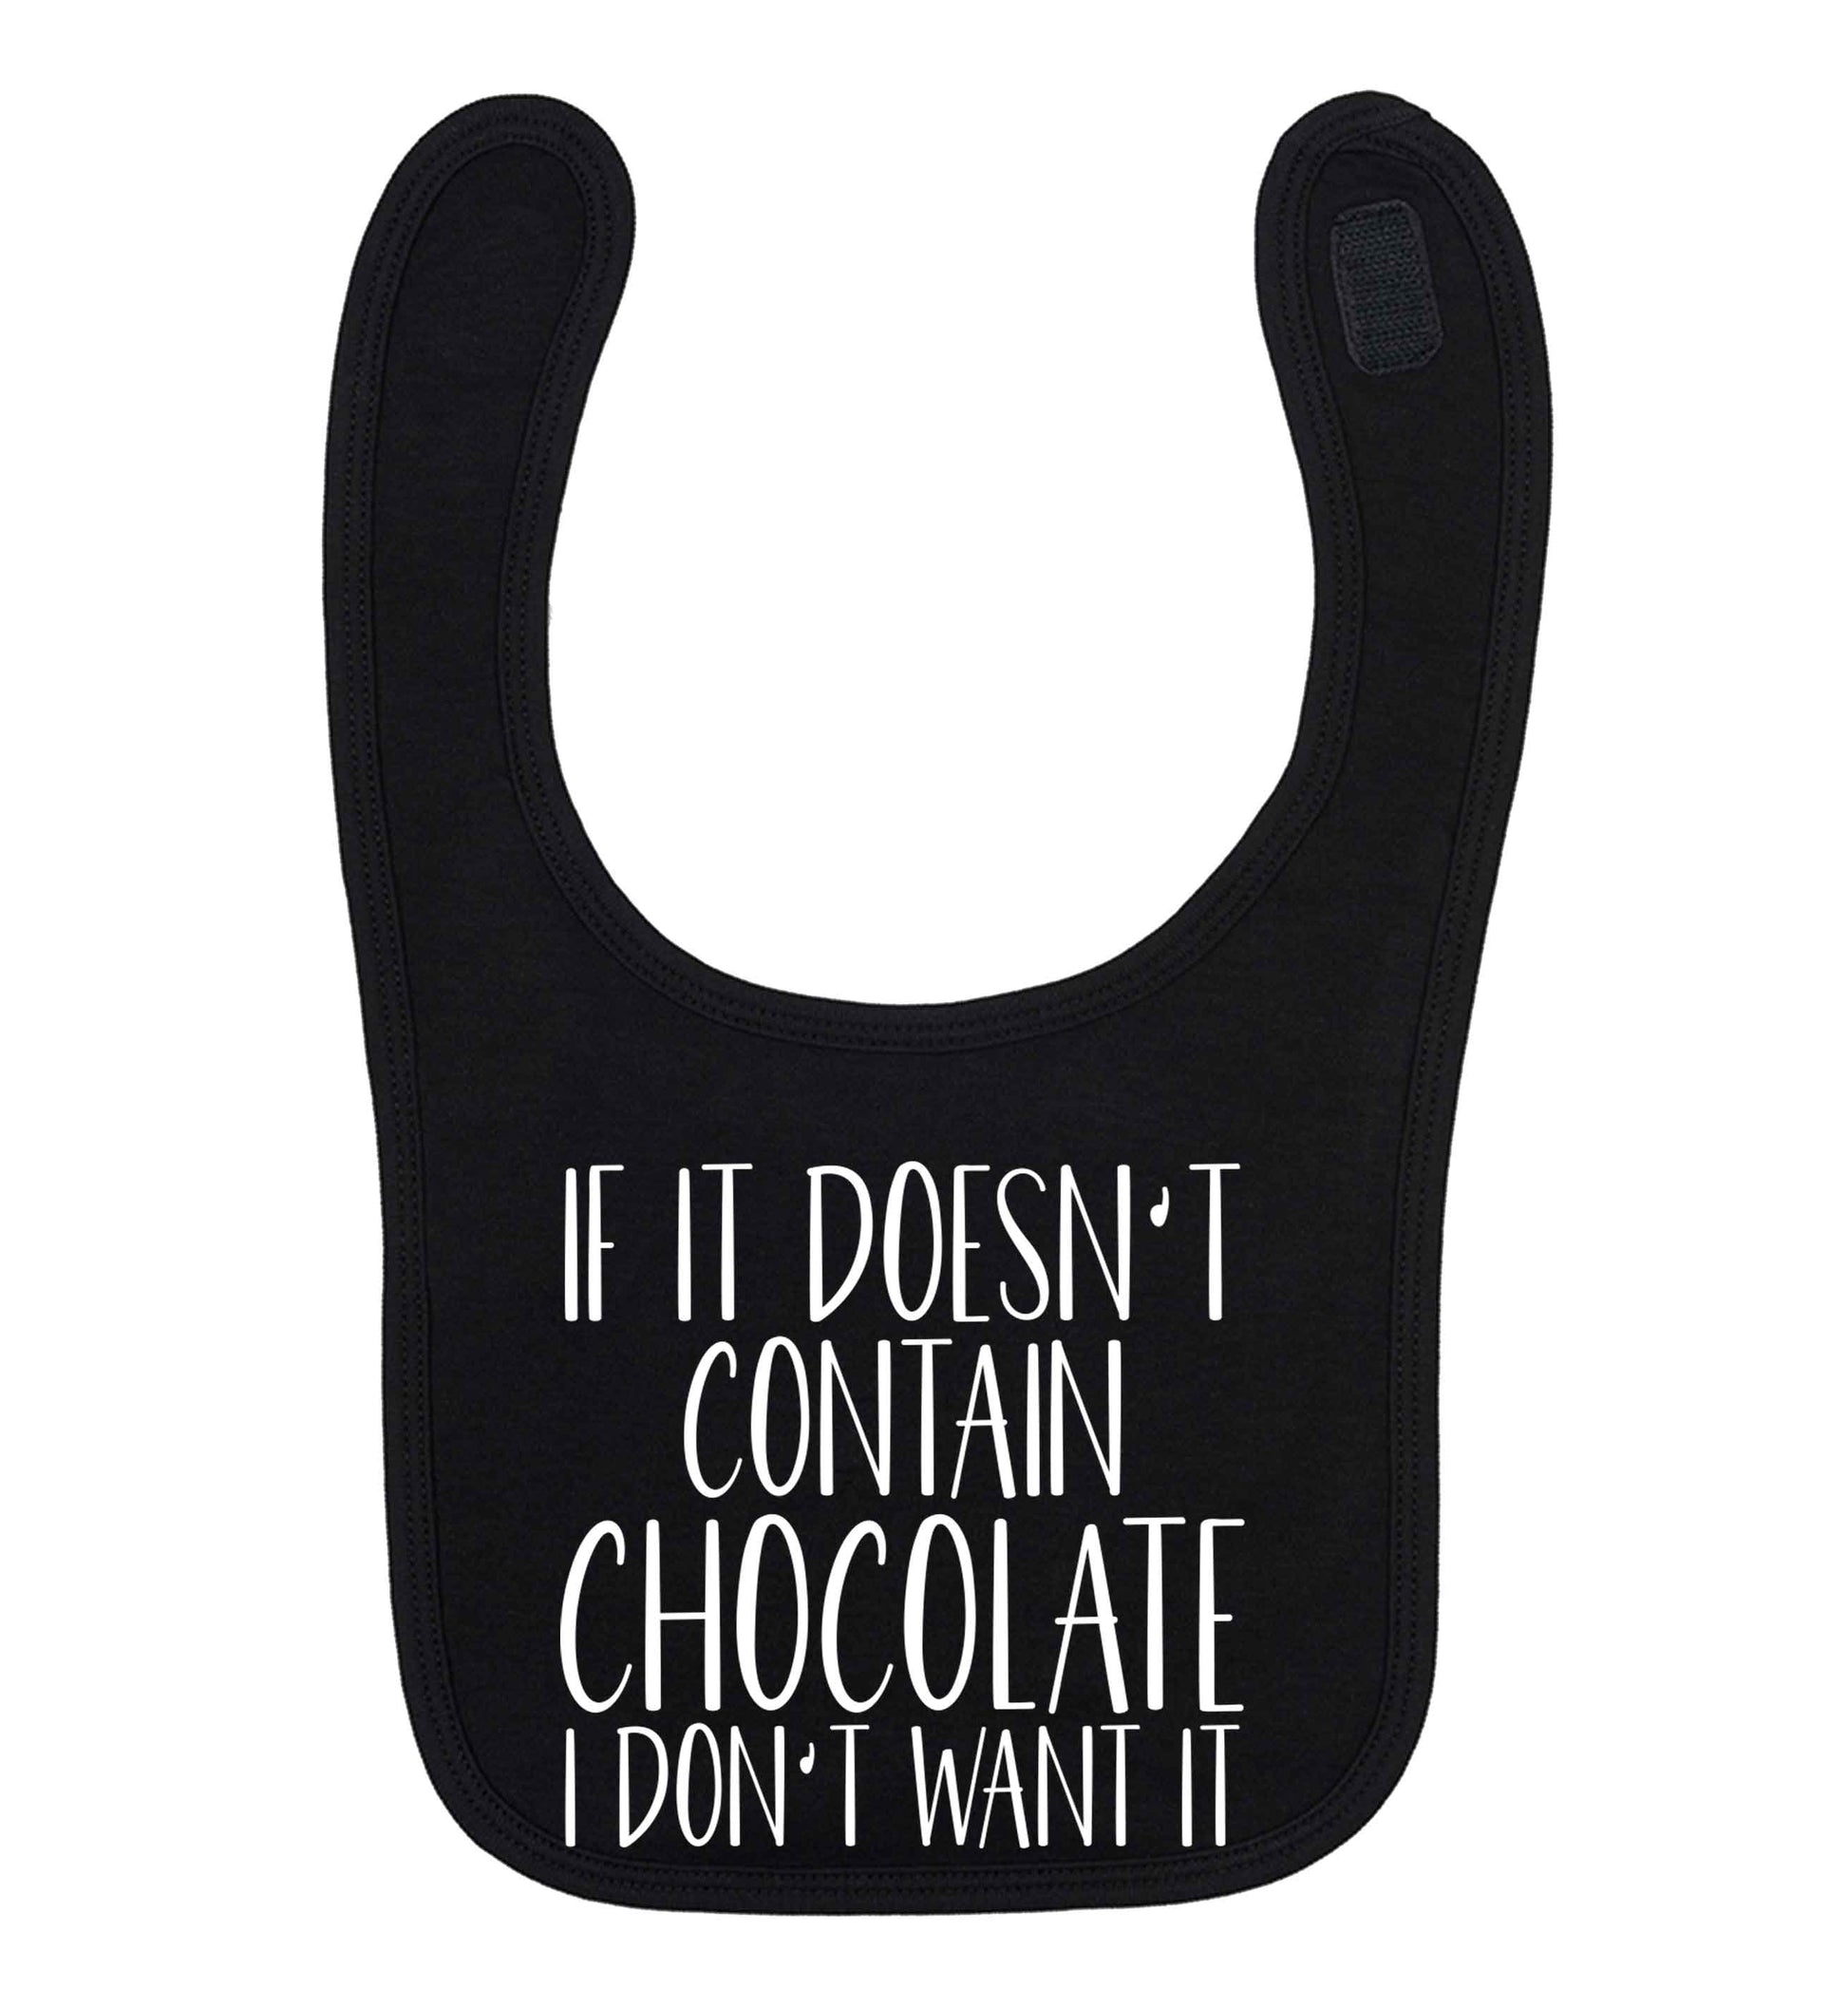 If it doesn't contain chocolate I don't want it black baby bib